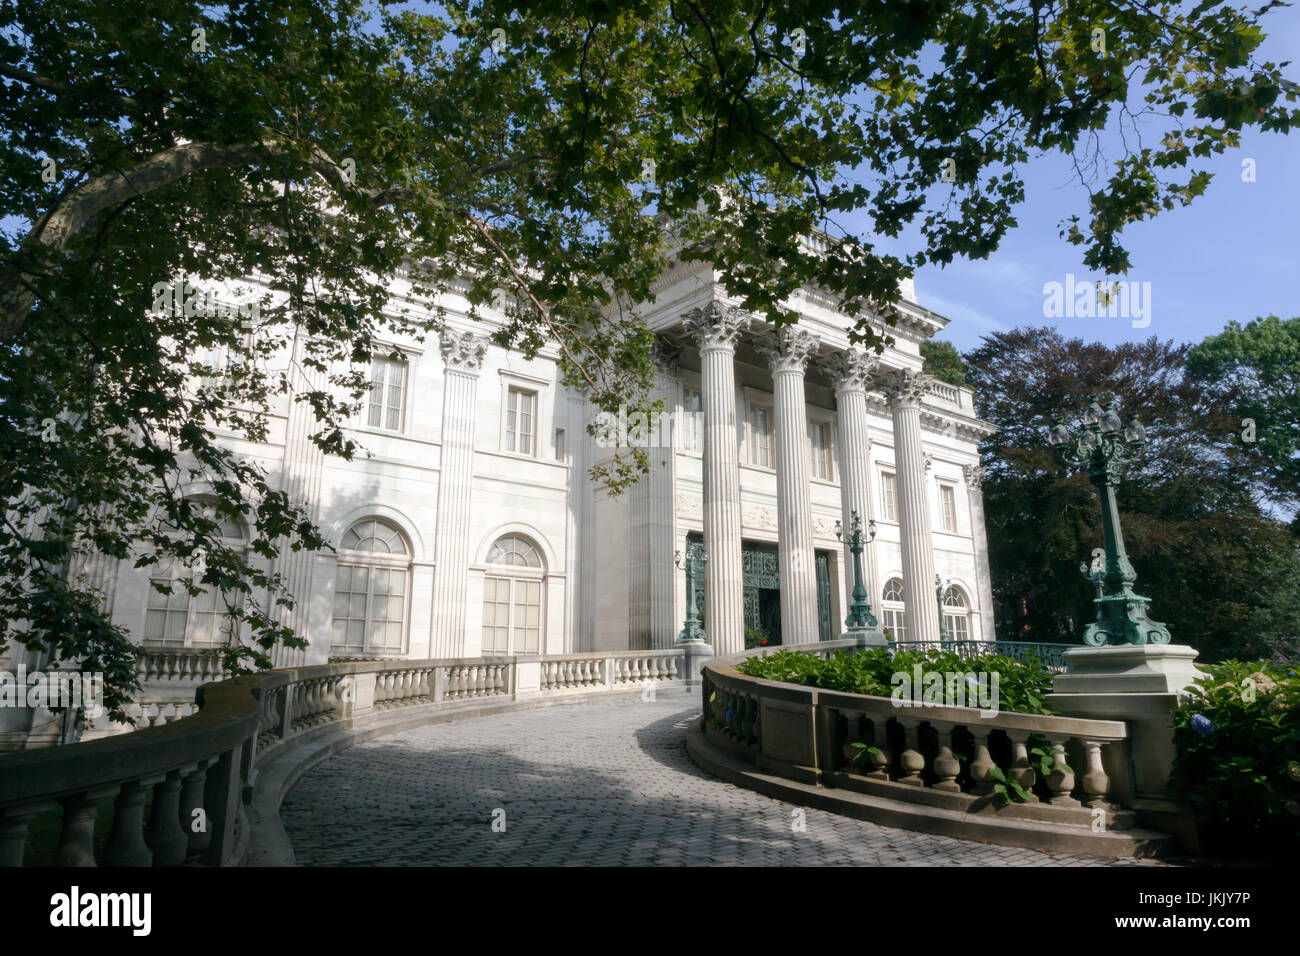 Marble House Mansion in Newport, Rhode Island was built by Richard Morris Hunt for William K. Vanderbilt between 1888-1892 & now open as a museum. Stock Photo